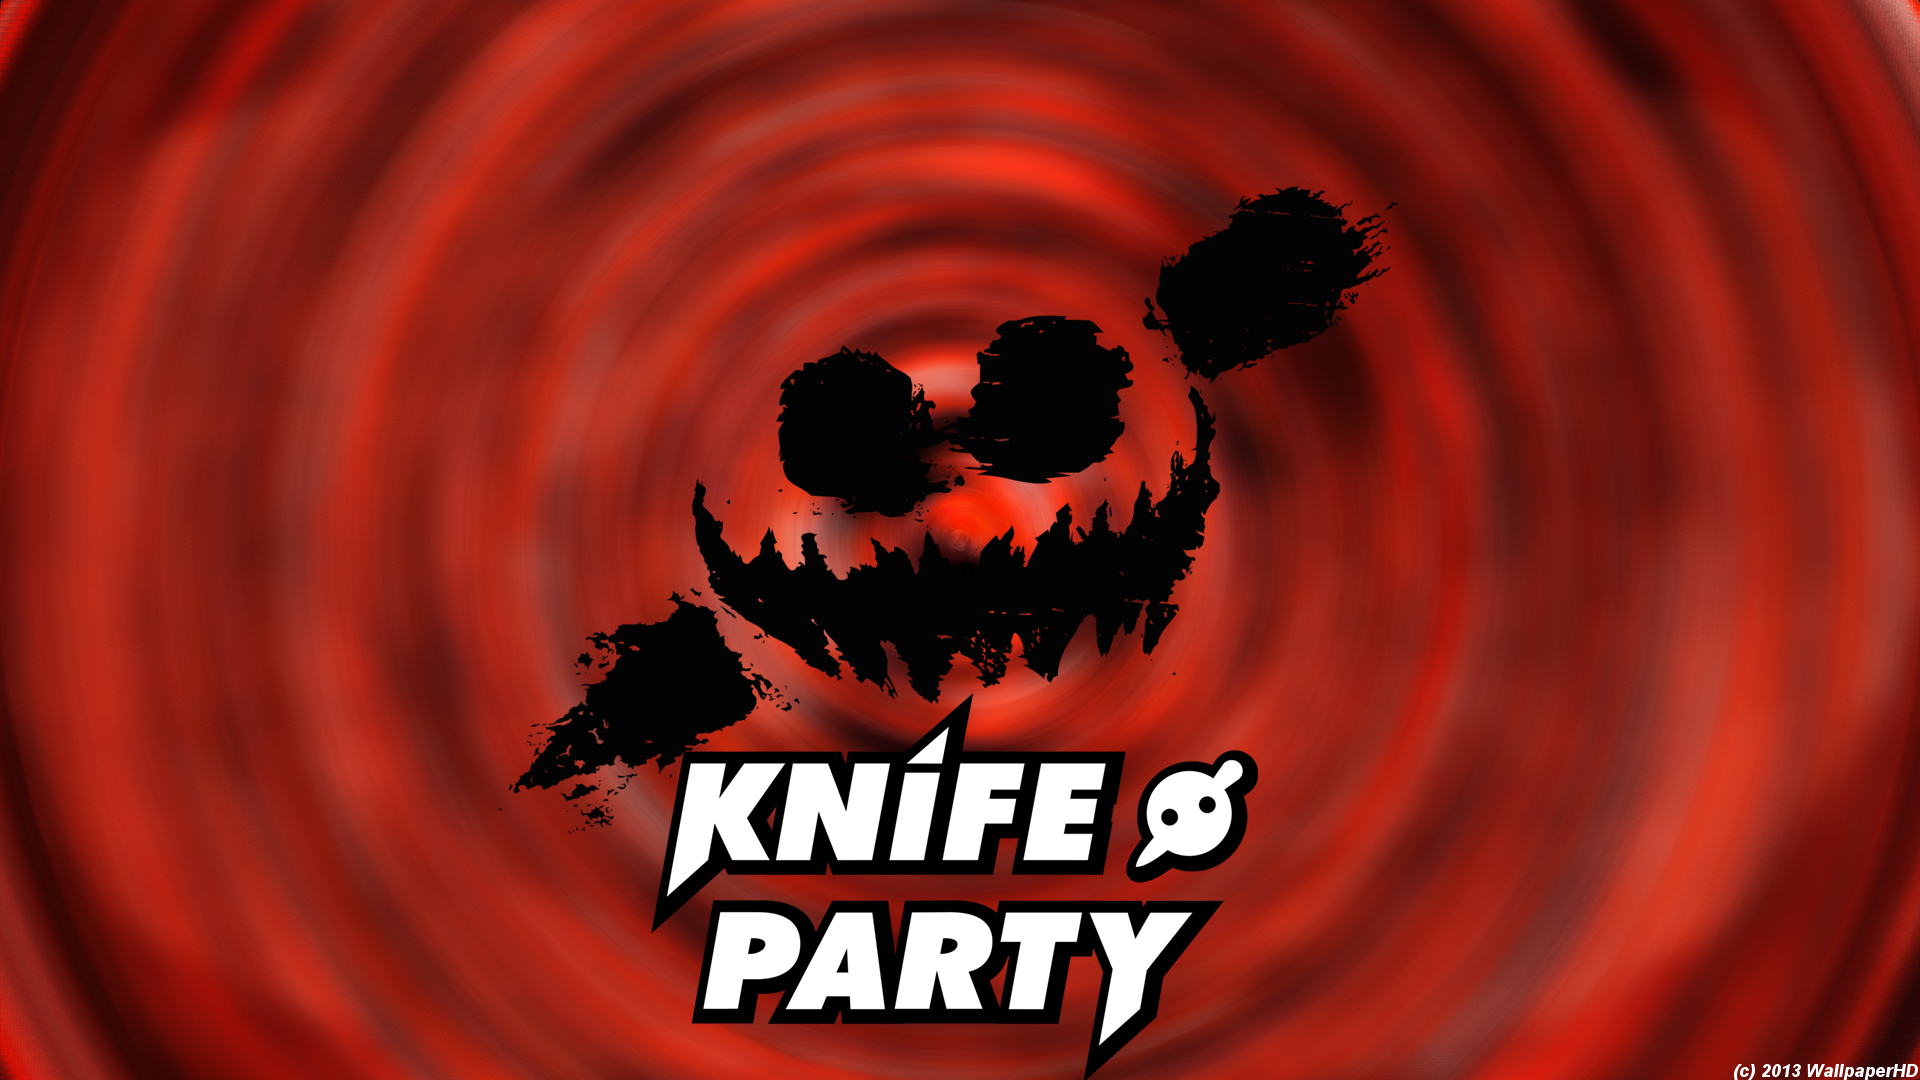 Knife Party Hunted Wallpaper By WallpaperHD On